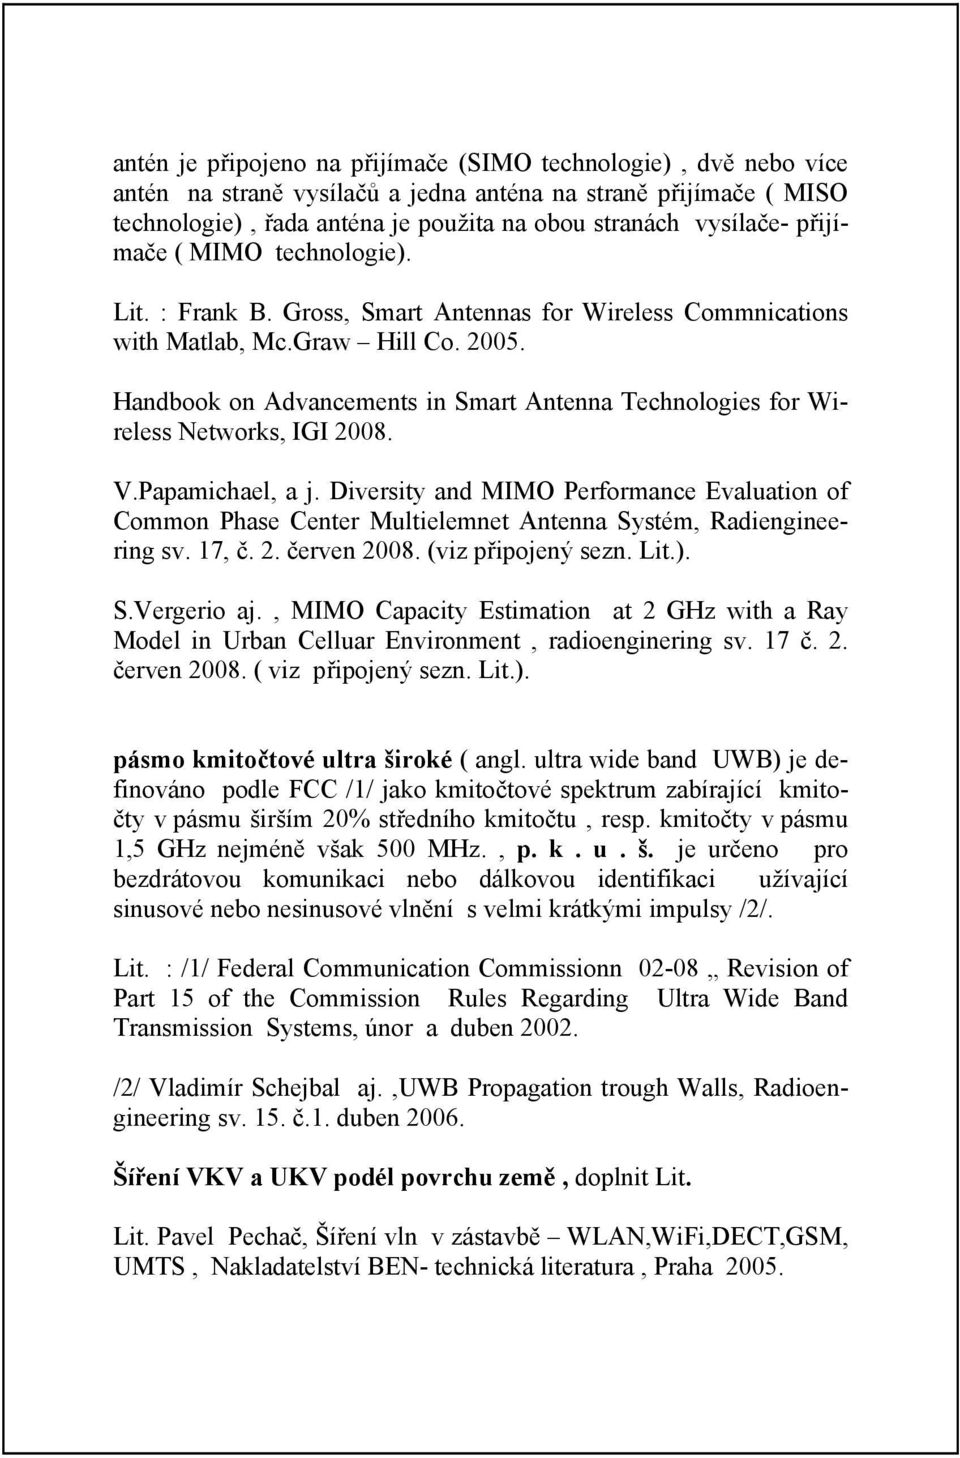 Handbook on Advancements in Smart Antenna Technologies for Wireless Networks, IGI 2008. V.Papamichael, a j.